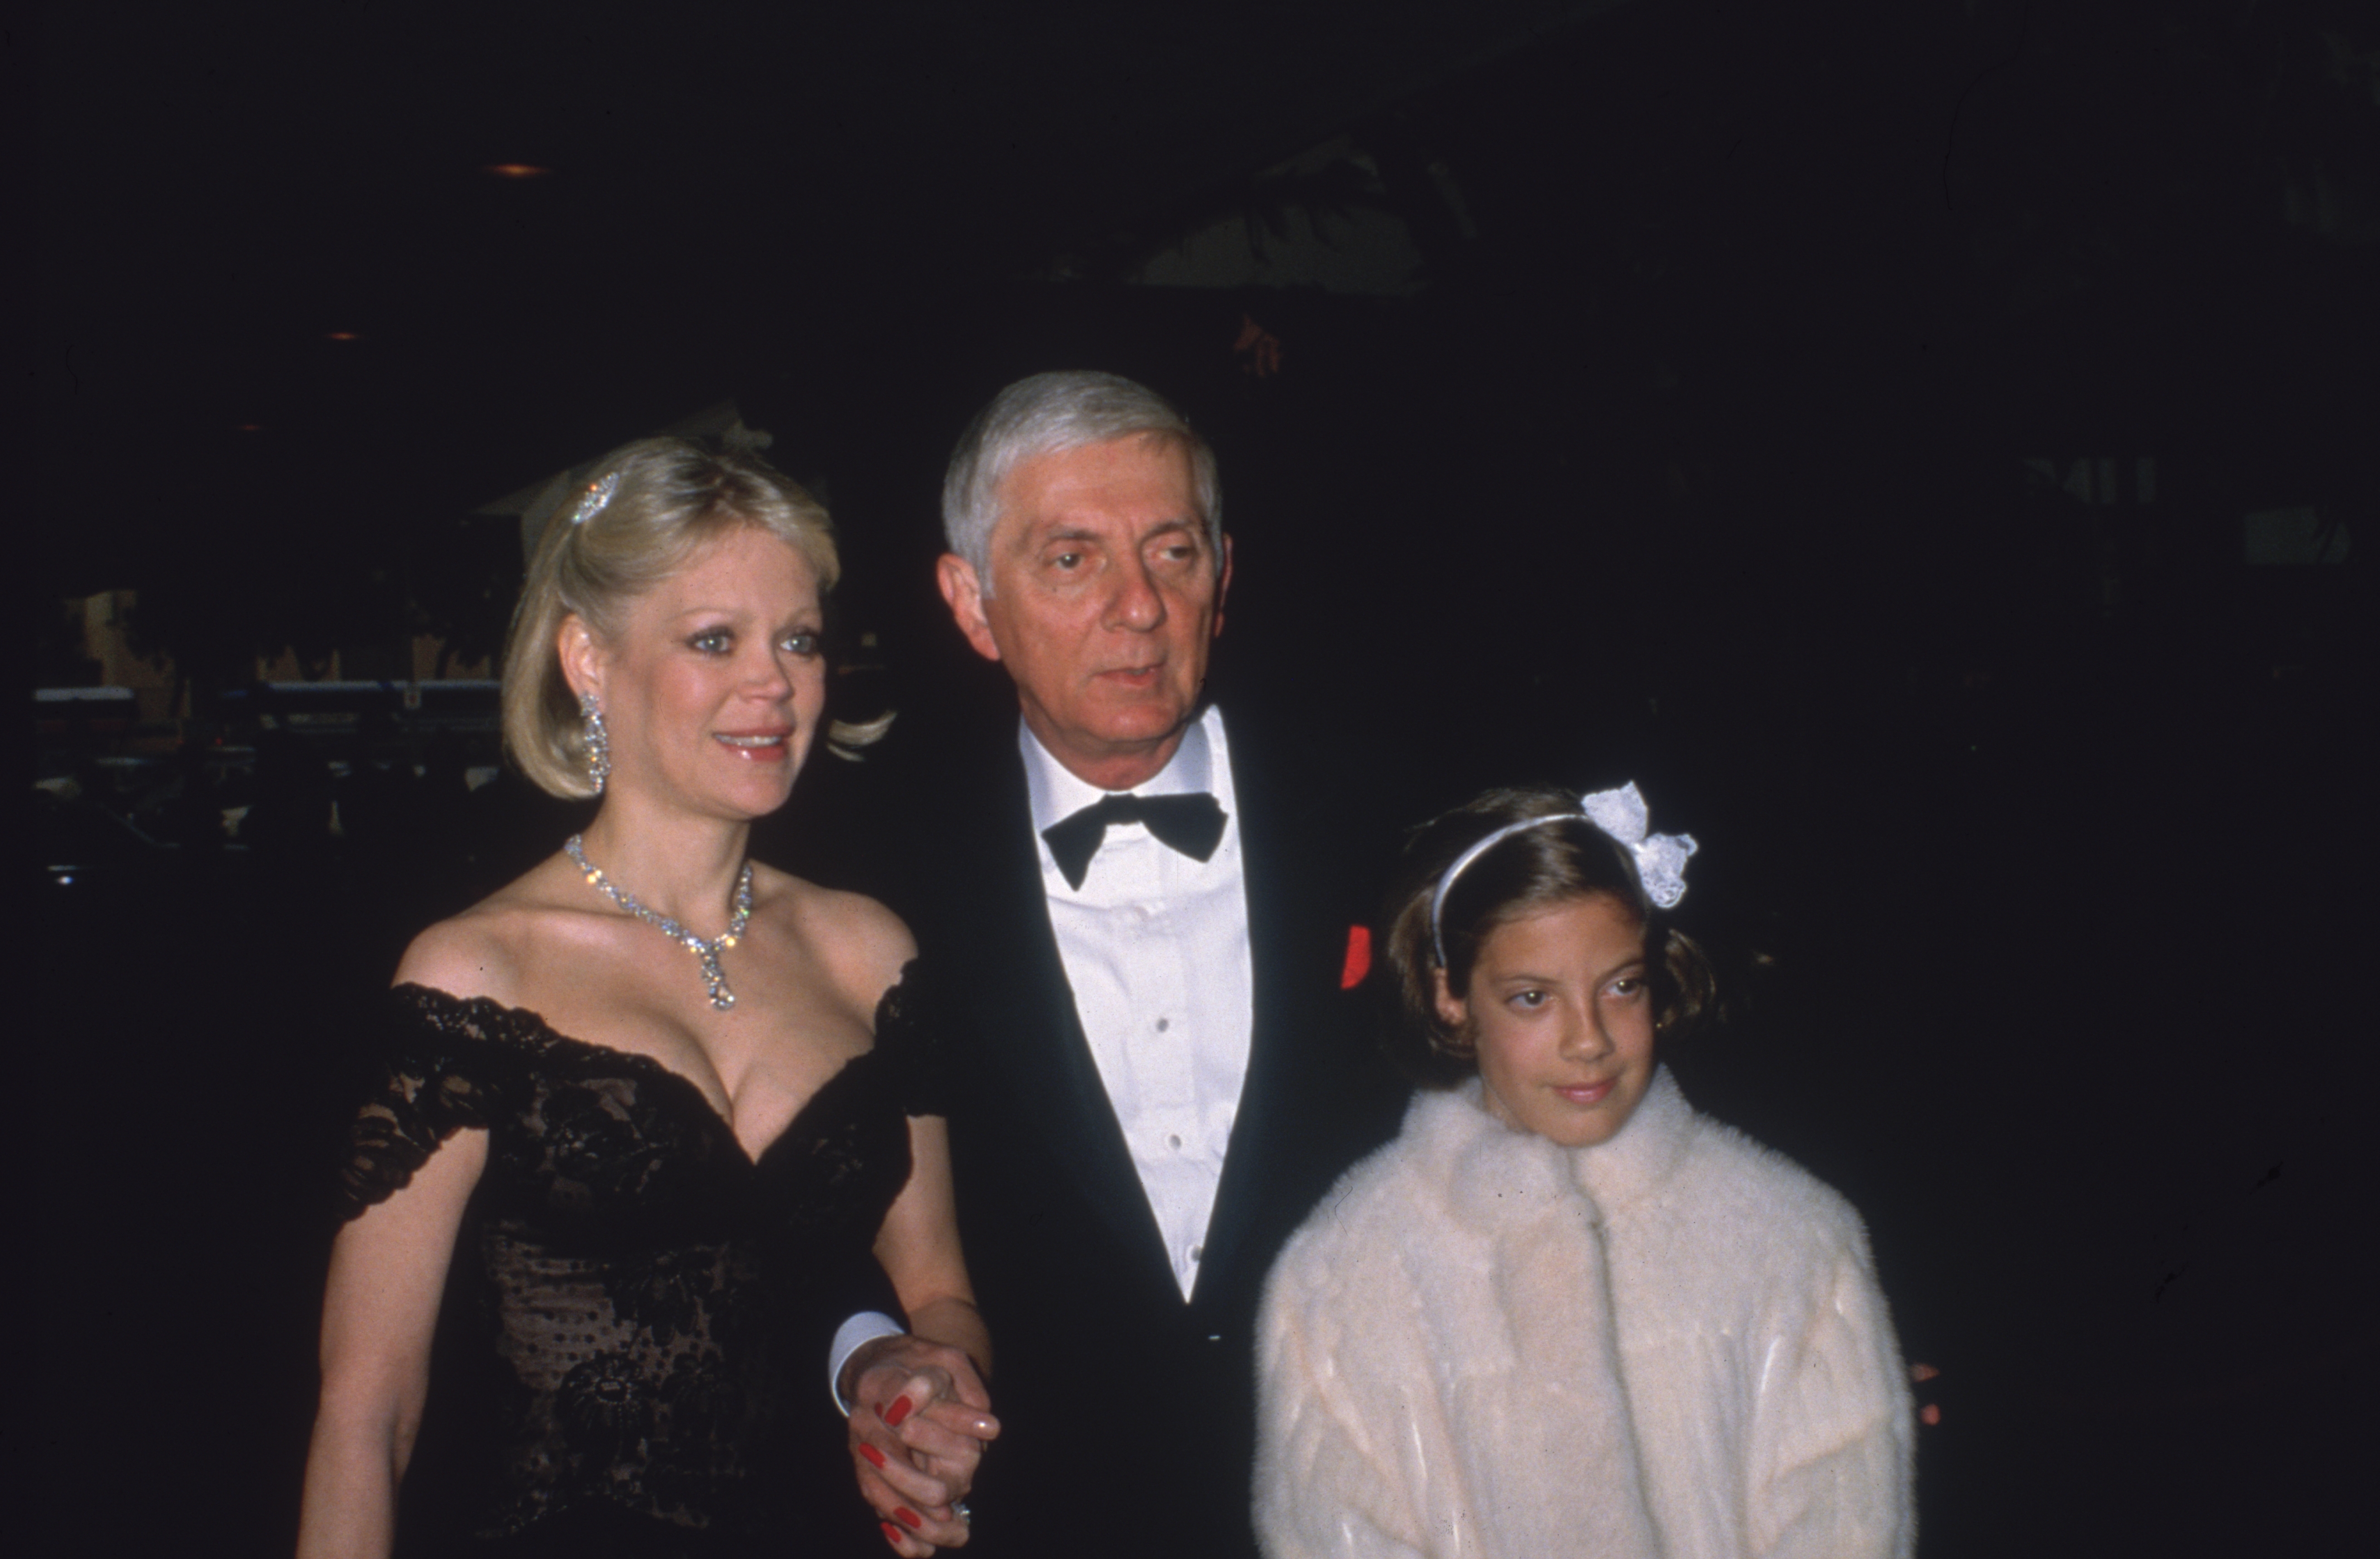 Candy, Aaron, and Tori Spelling at a formal event in 1985 | Source: Getty Images